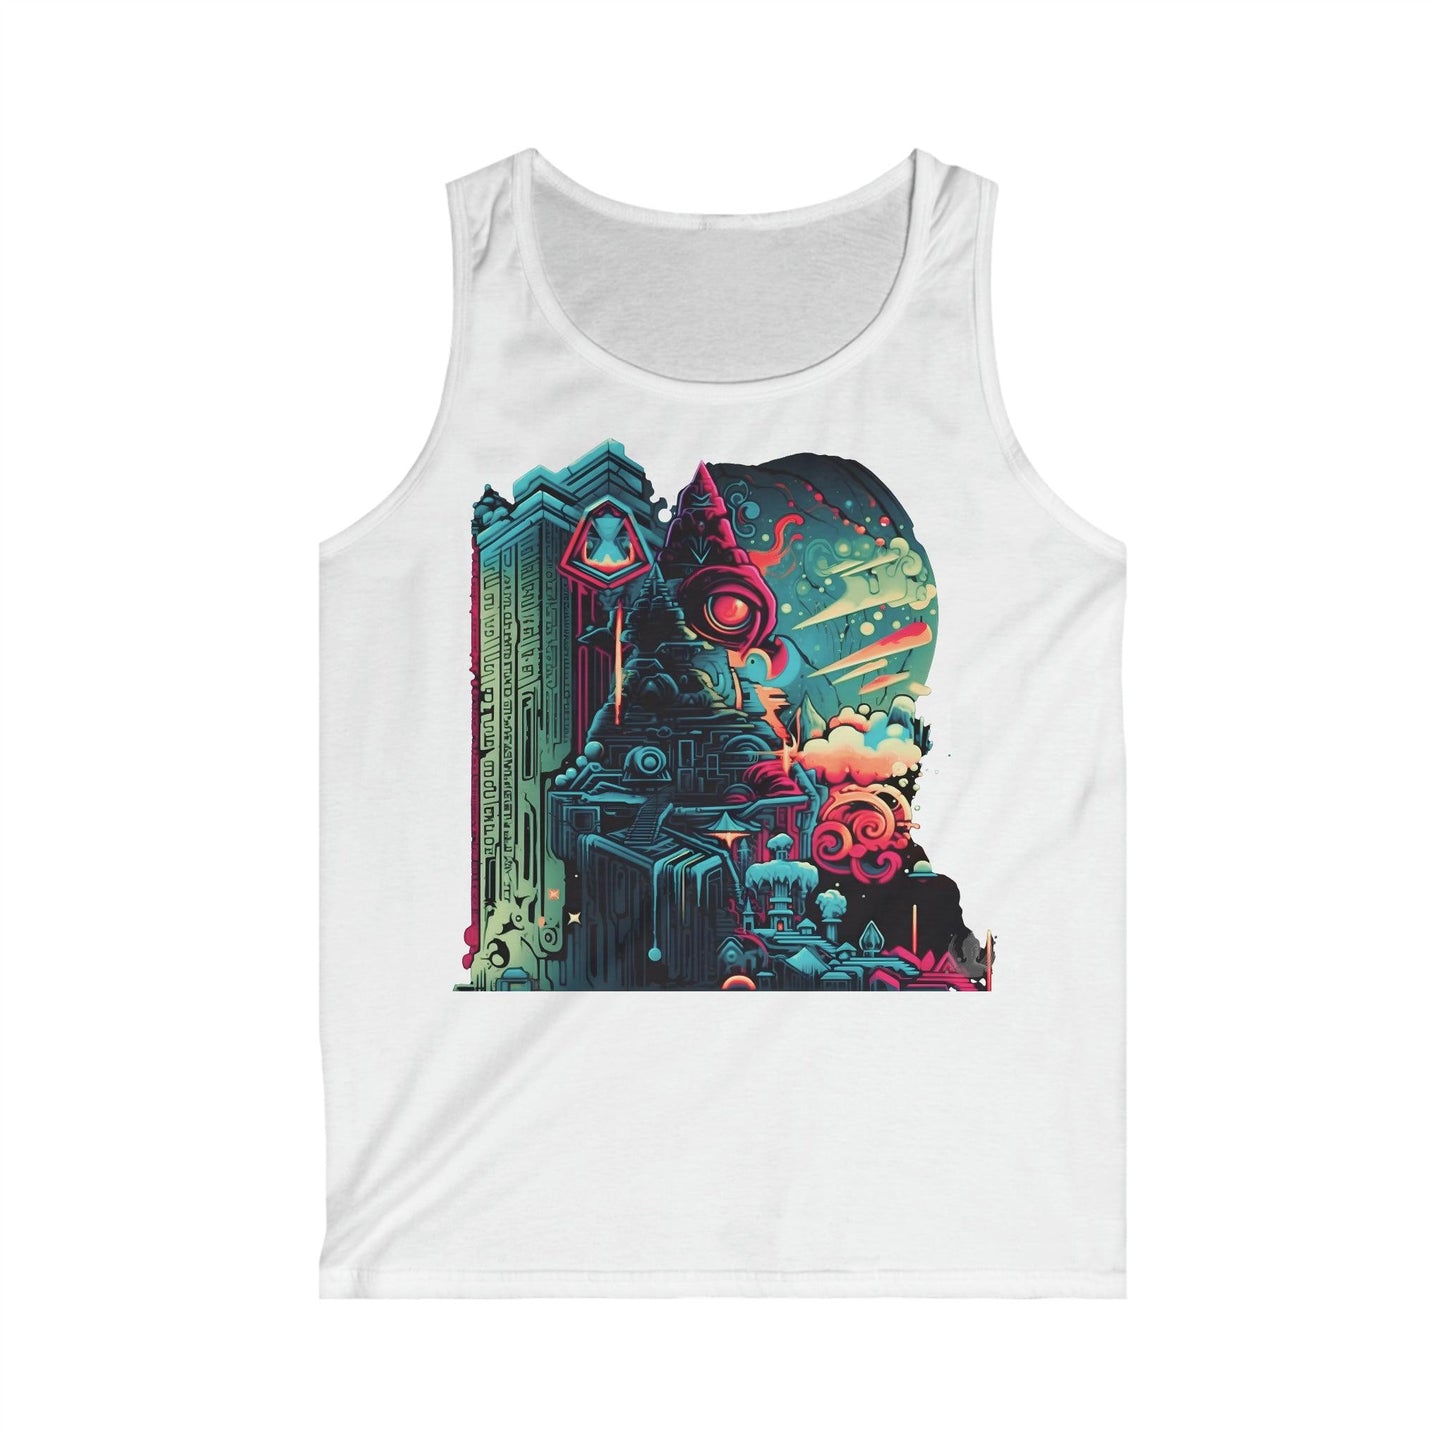 The Alchemystical Dream Illustration Men's and Women's Unisex Softstyle Tank Top for Festival and Street Wear - Alchemystics.org